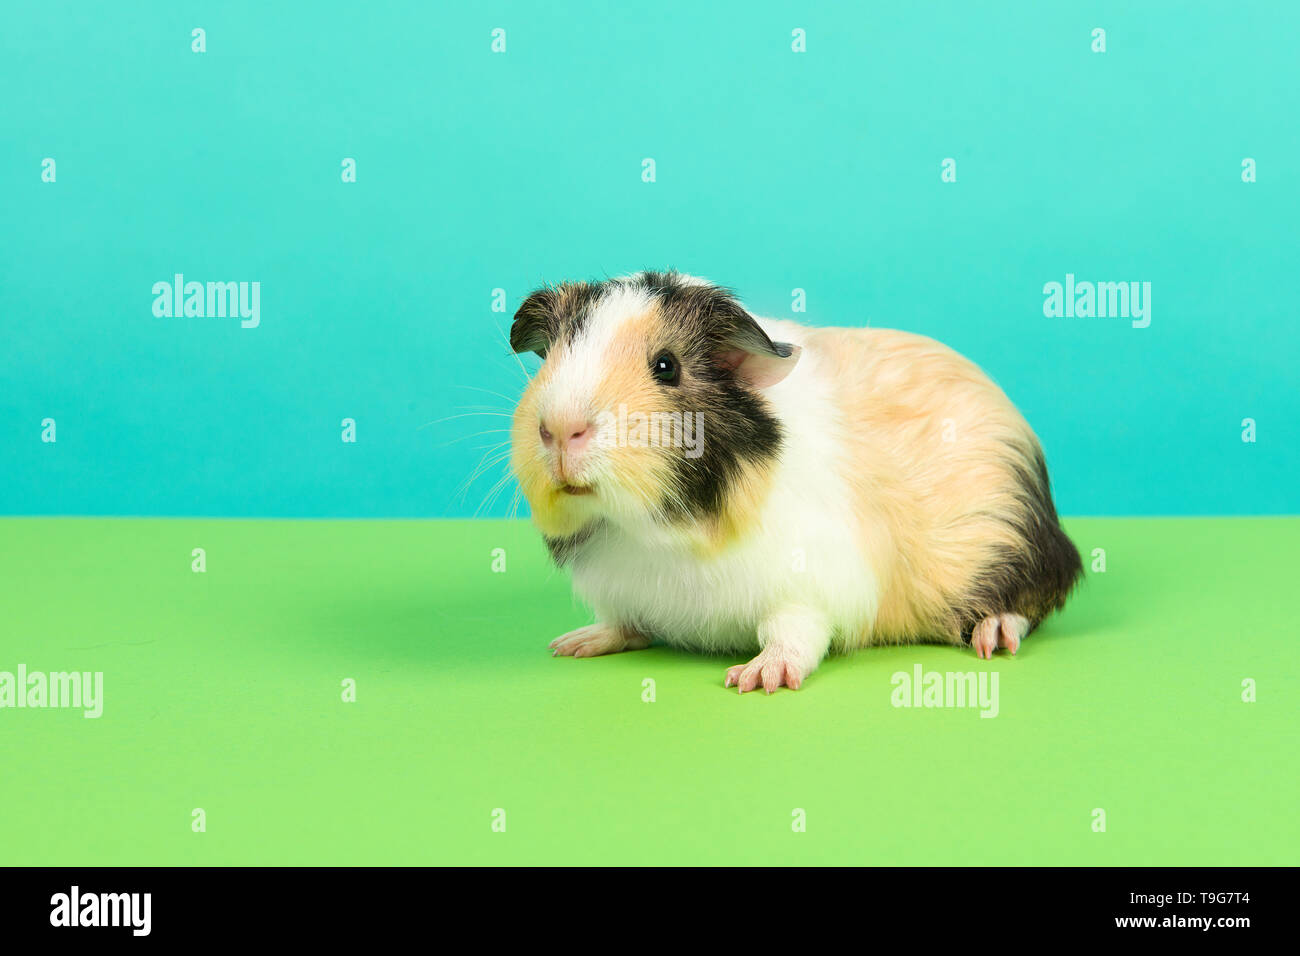 Smooth haired tricolour guinea pig on a green and blue background Stock Photo